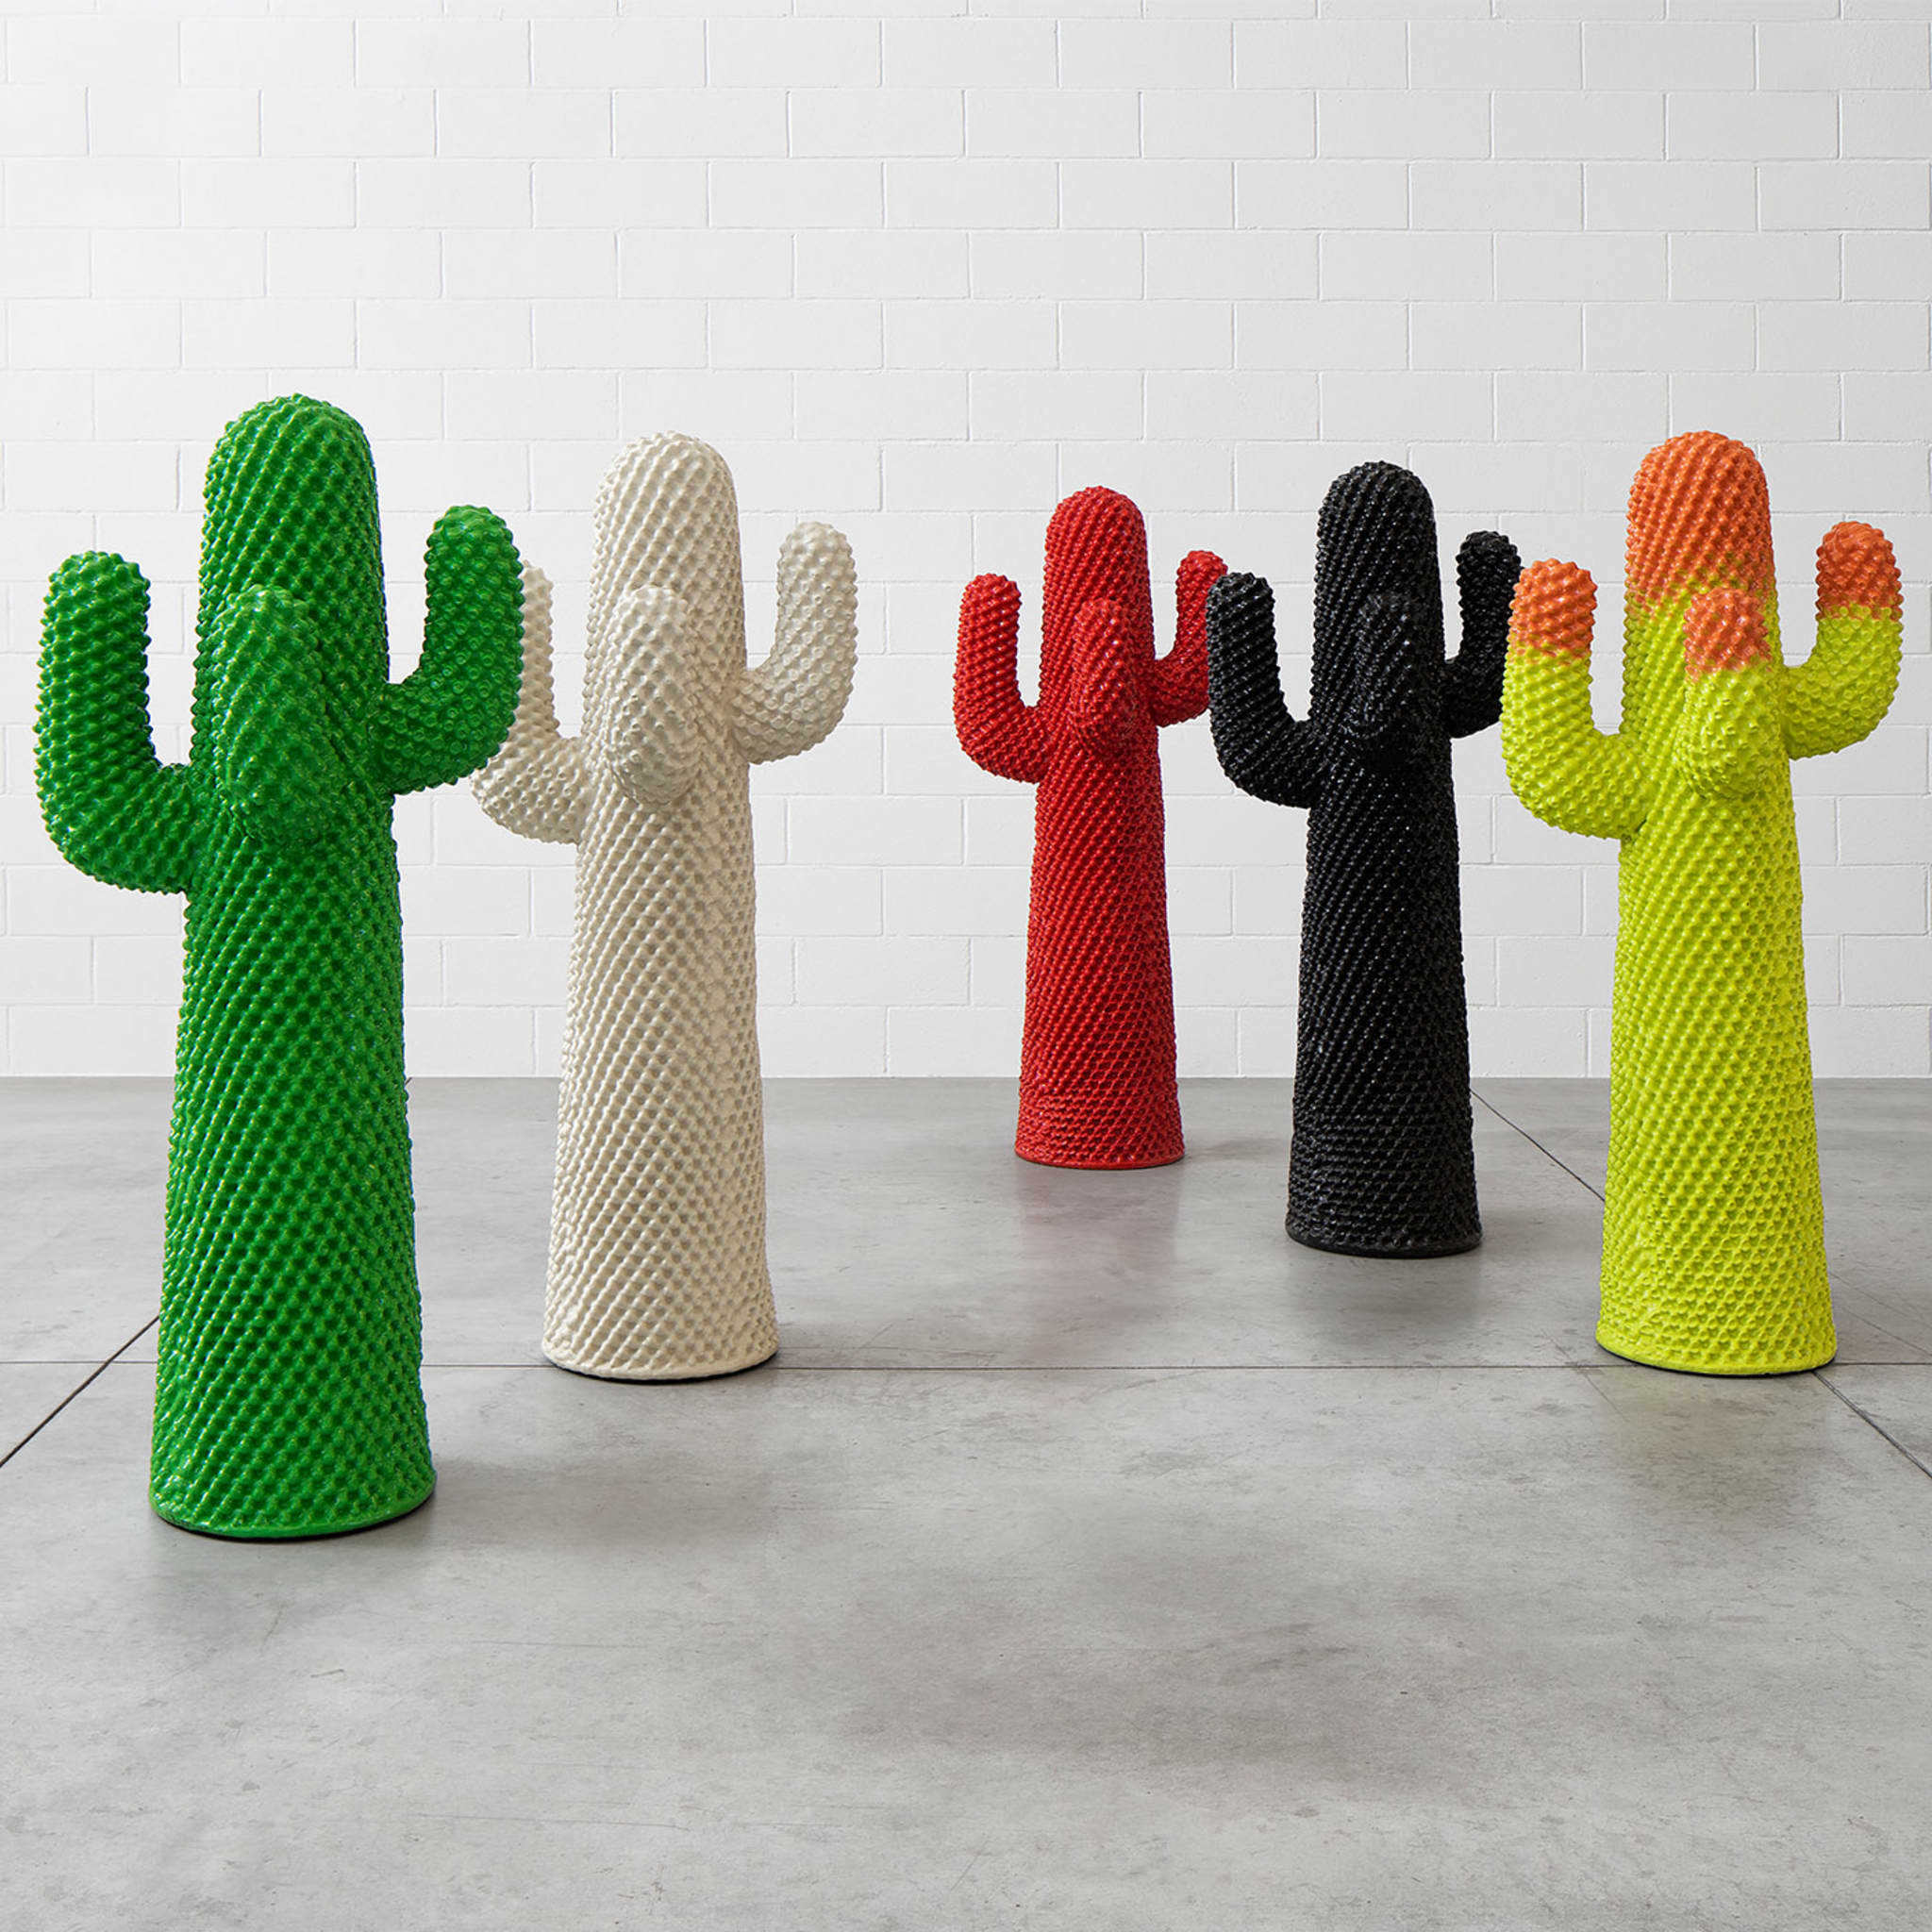 Nerocactus Limited Edition Coat Stand by Drocco/Mello - Alternative view 1